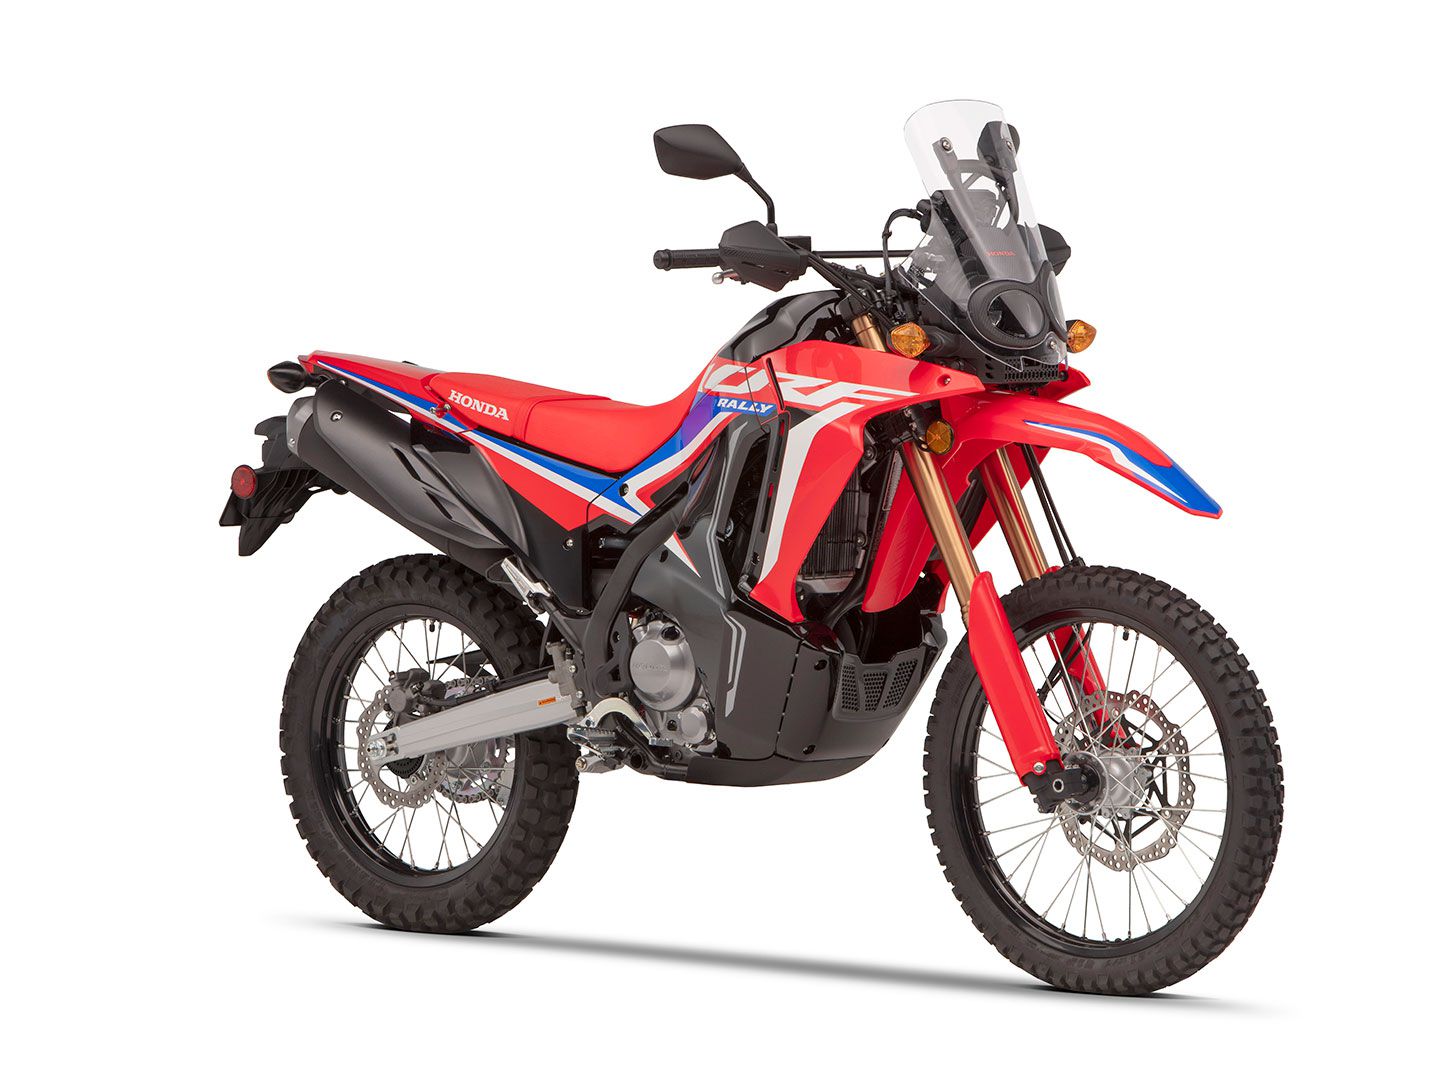 With a skid plate, hand guards, and frame-mounted windscreen, the CRF300L Rally is well-equipped to thwart off the elements.